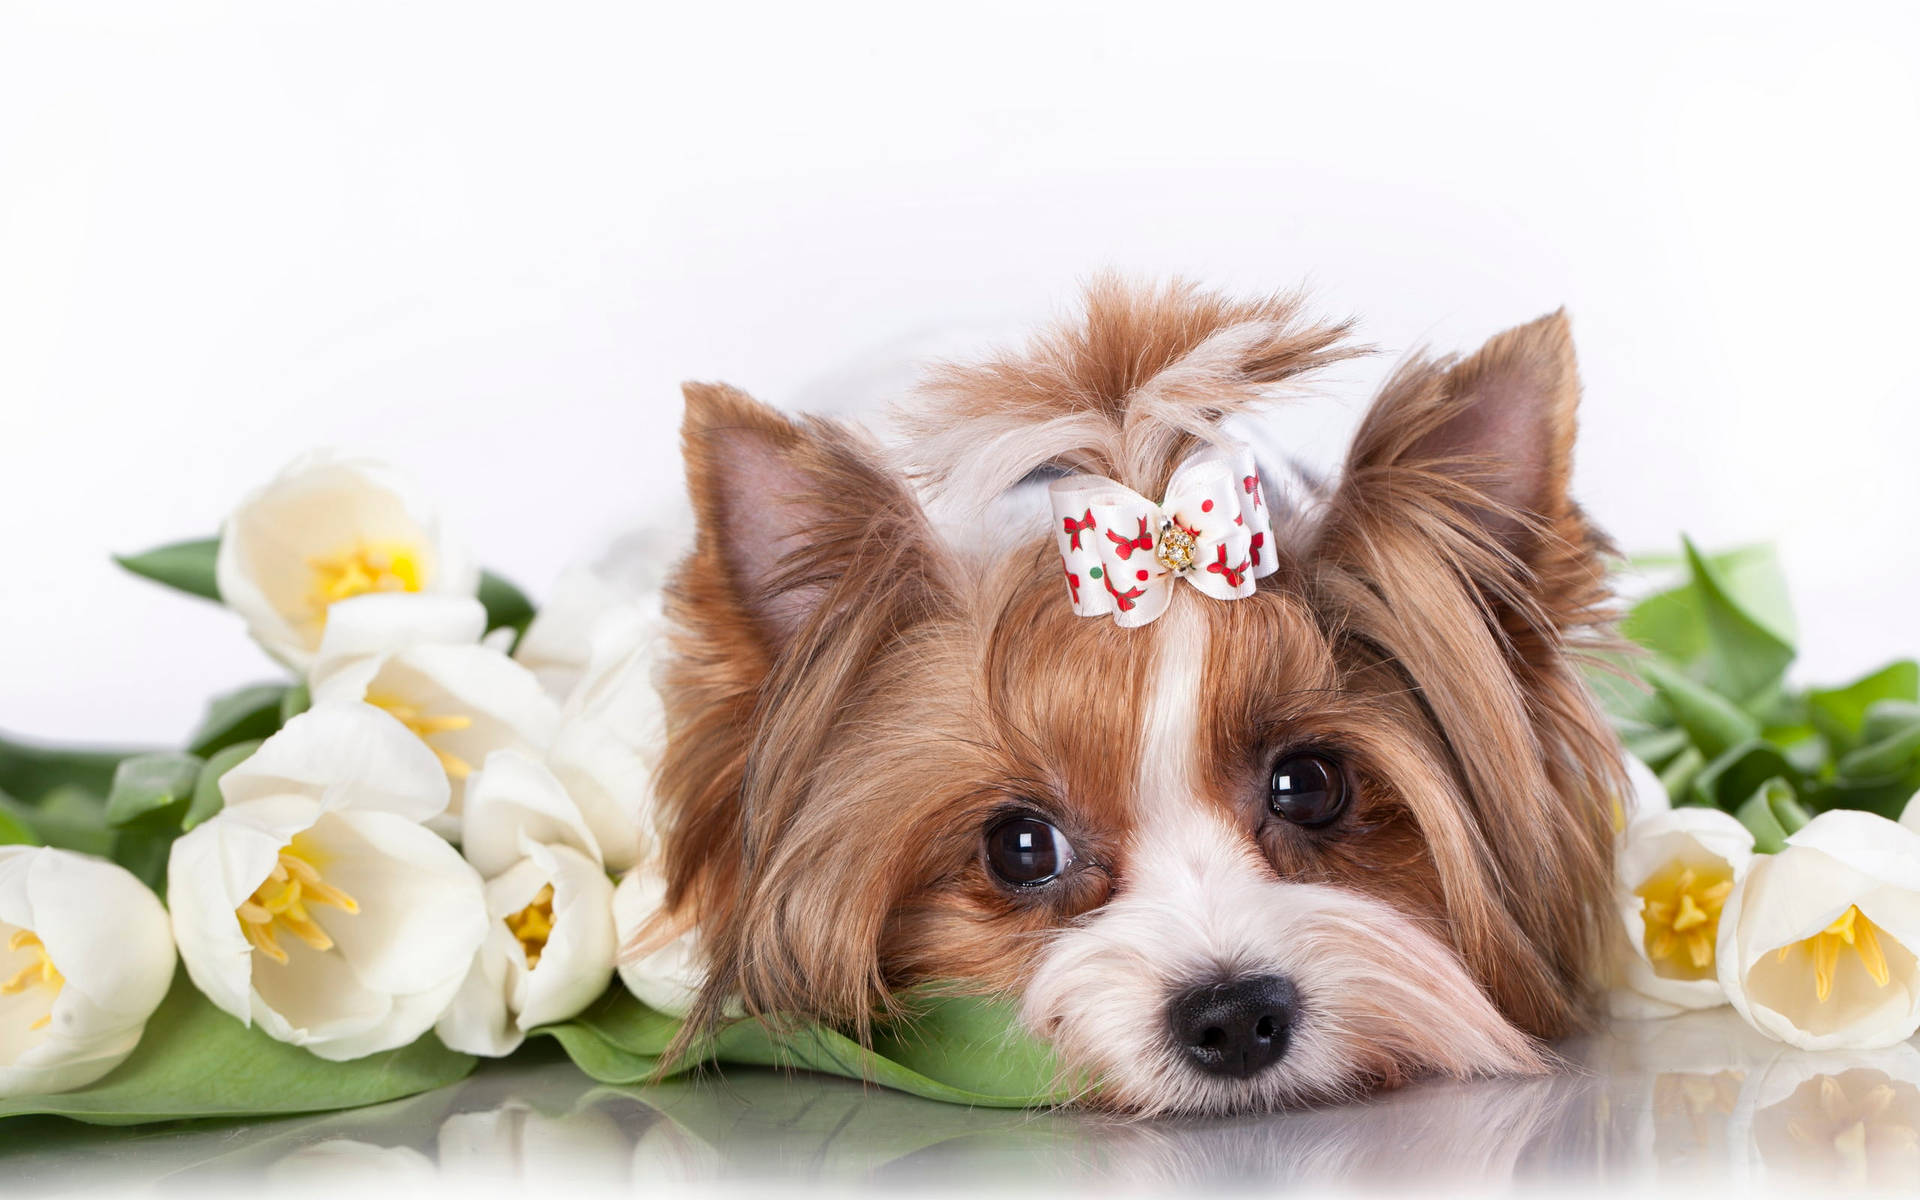 Yorkie Puppy Surrounded By Tulips Wallpaper